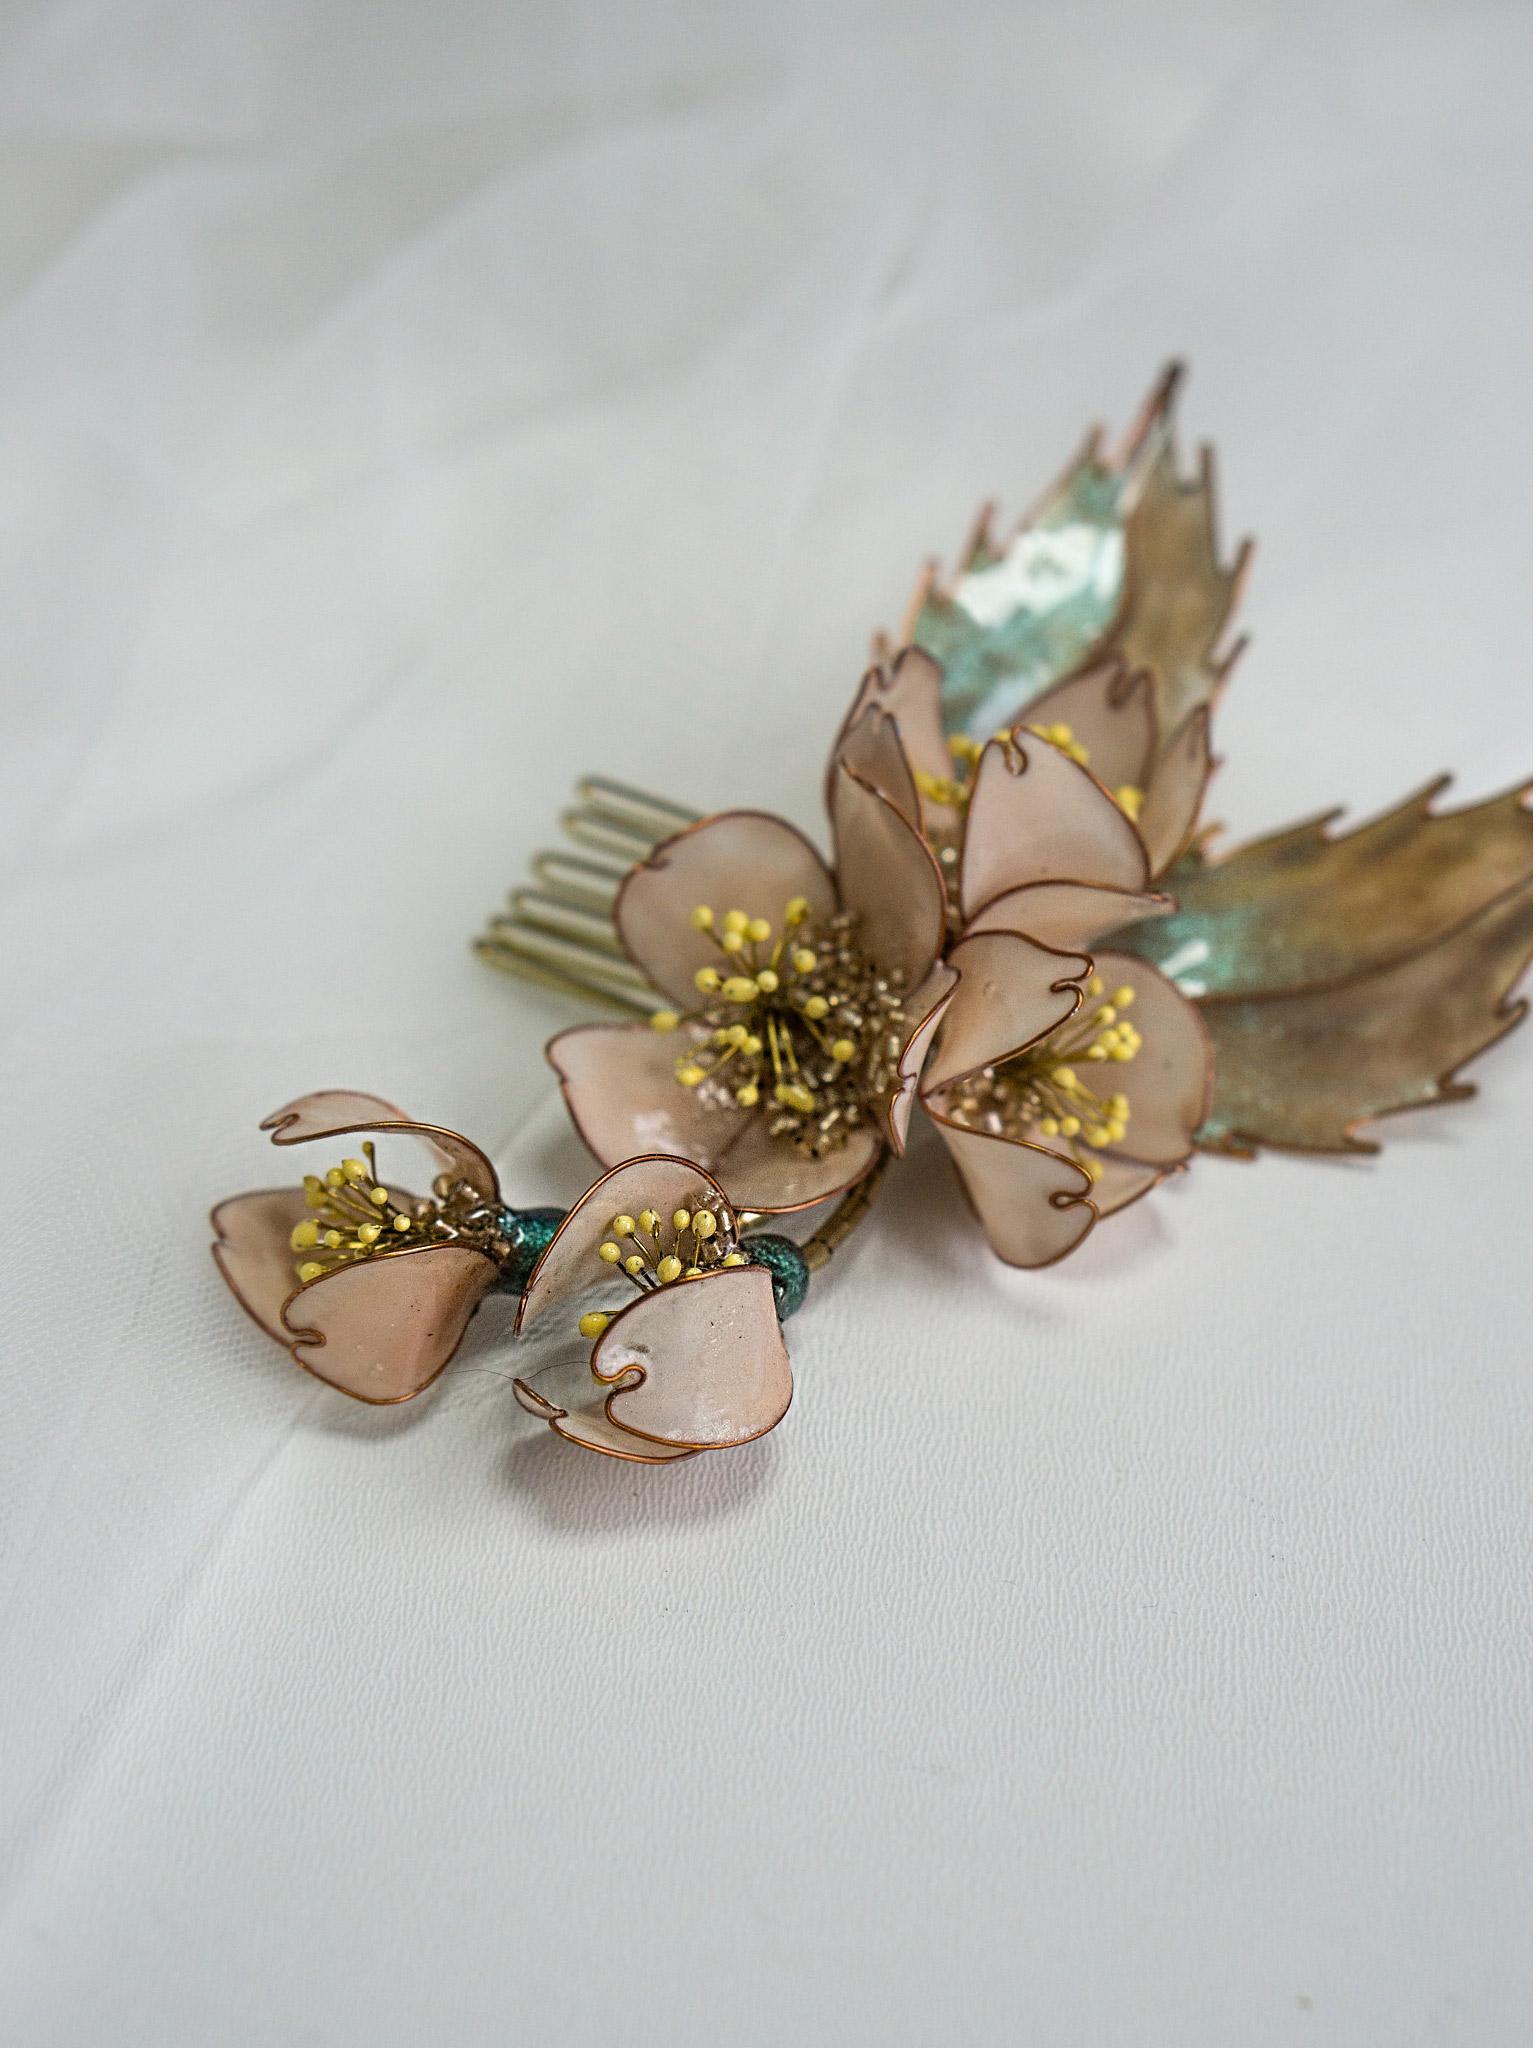 Effortlessly Chic: Light Pink Hair Comb with Peach Flowers and Sculpted Leaves